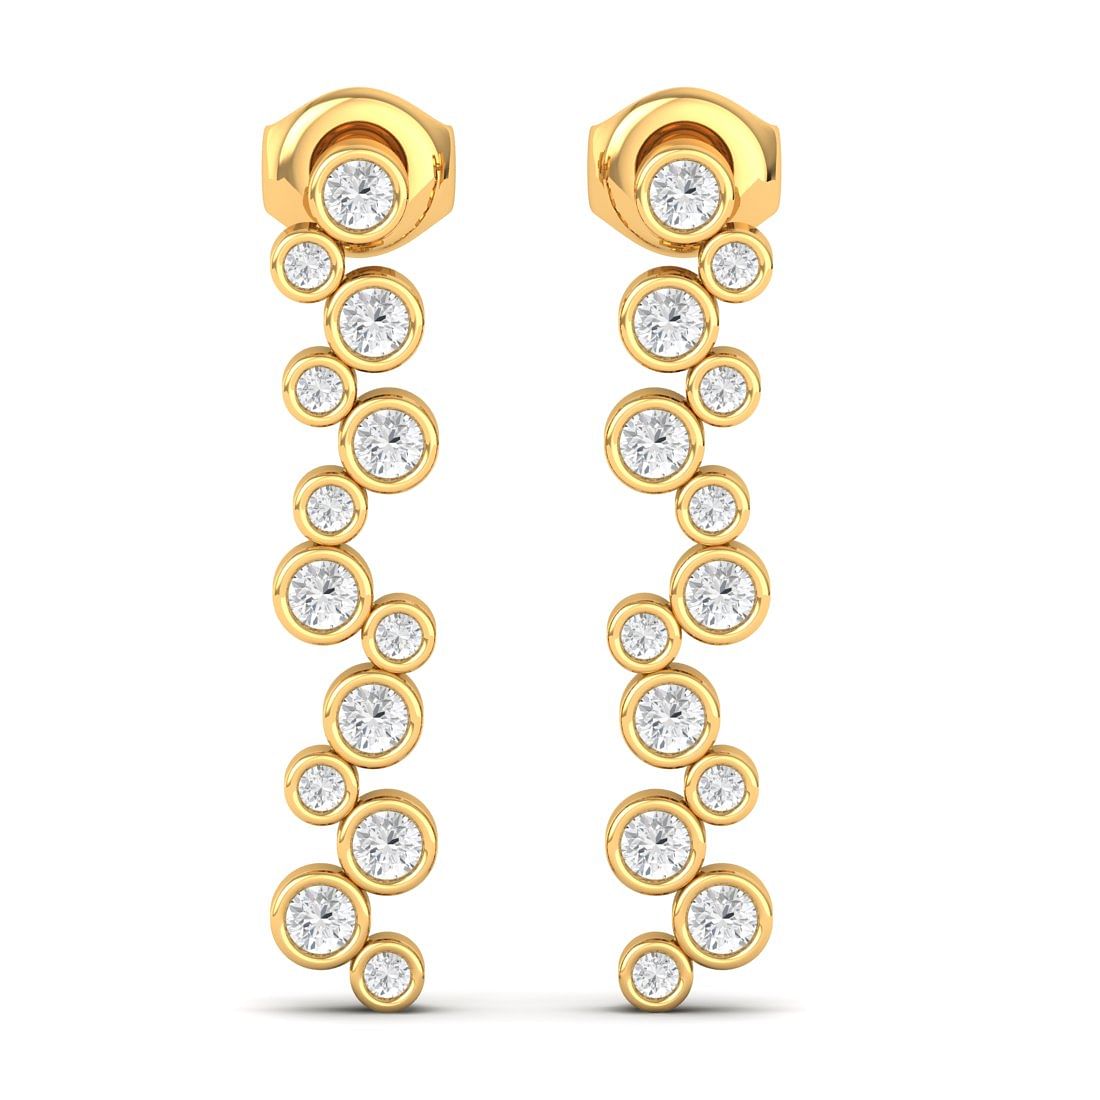 Rose Diamond Earrings with yellow gold earring